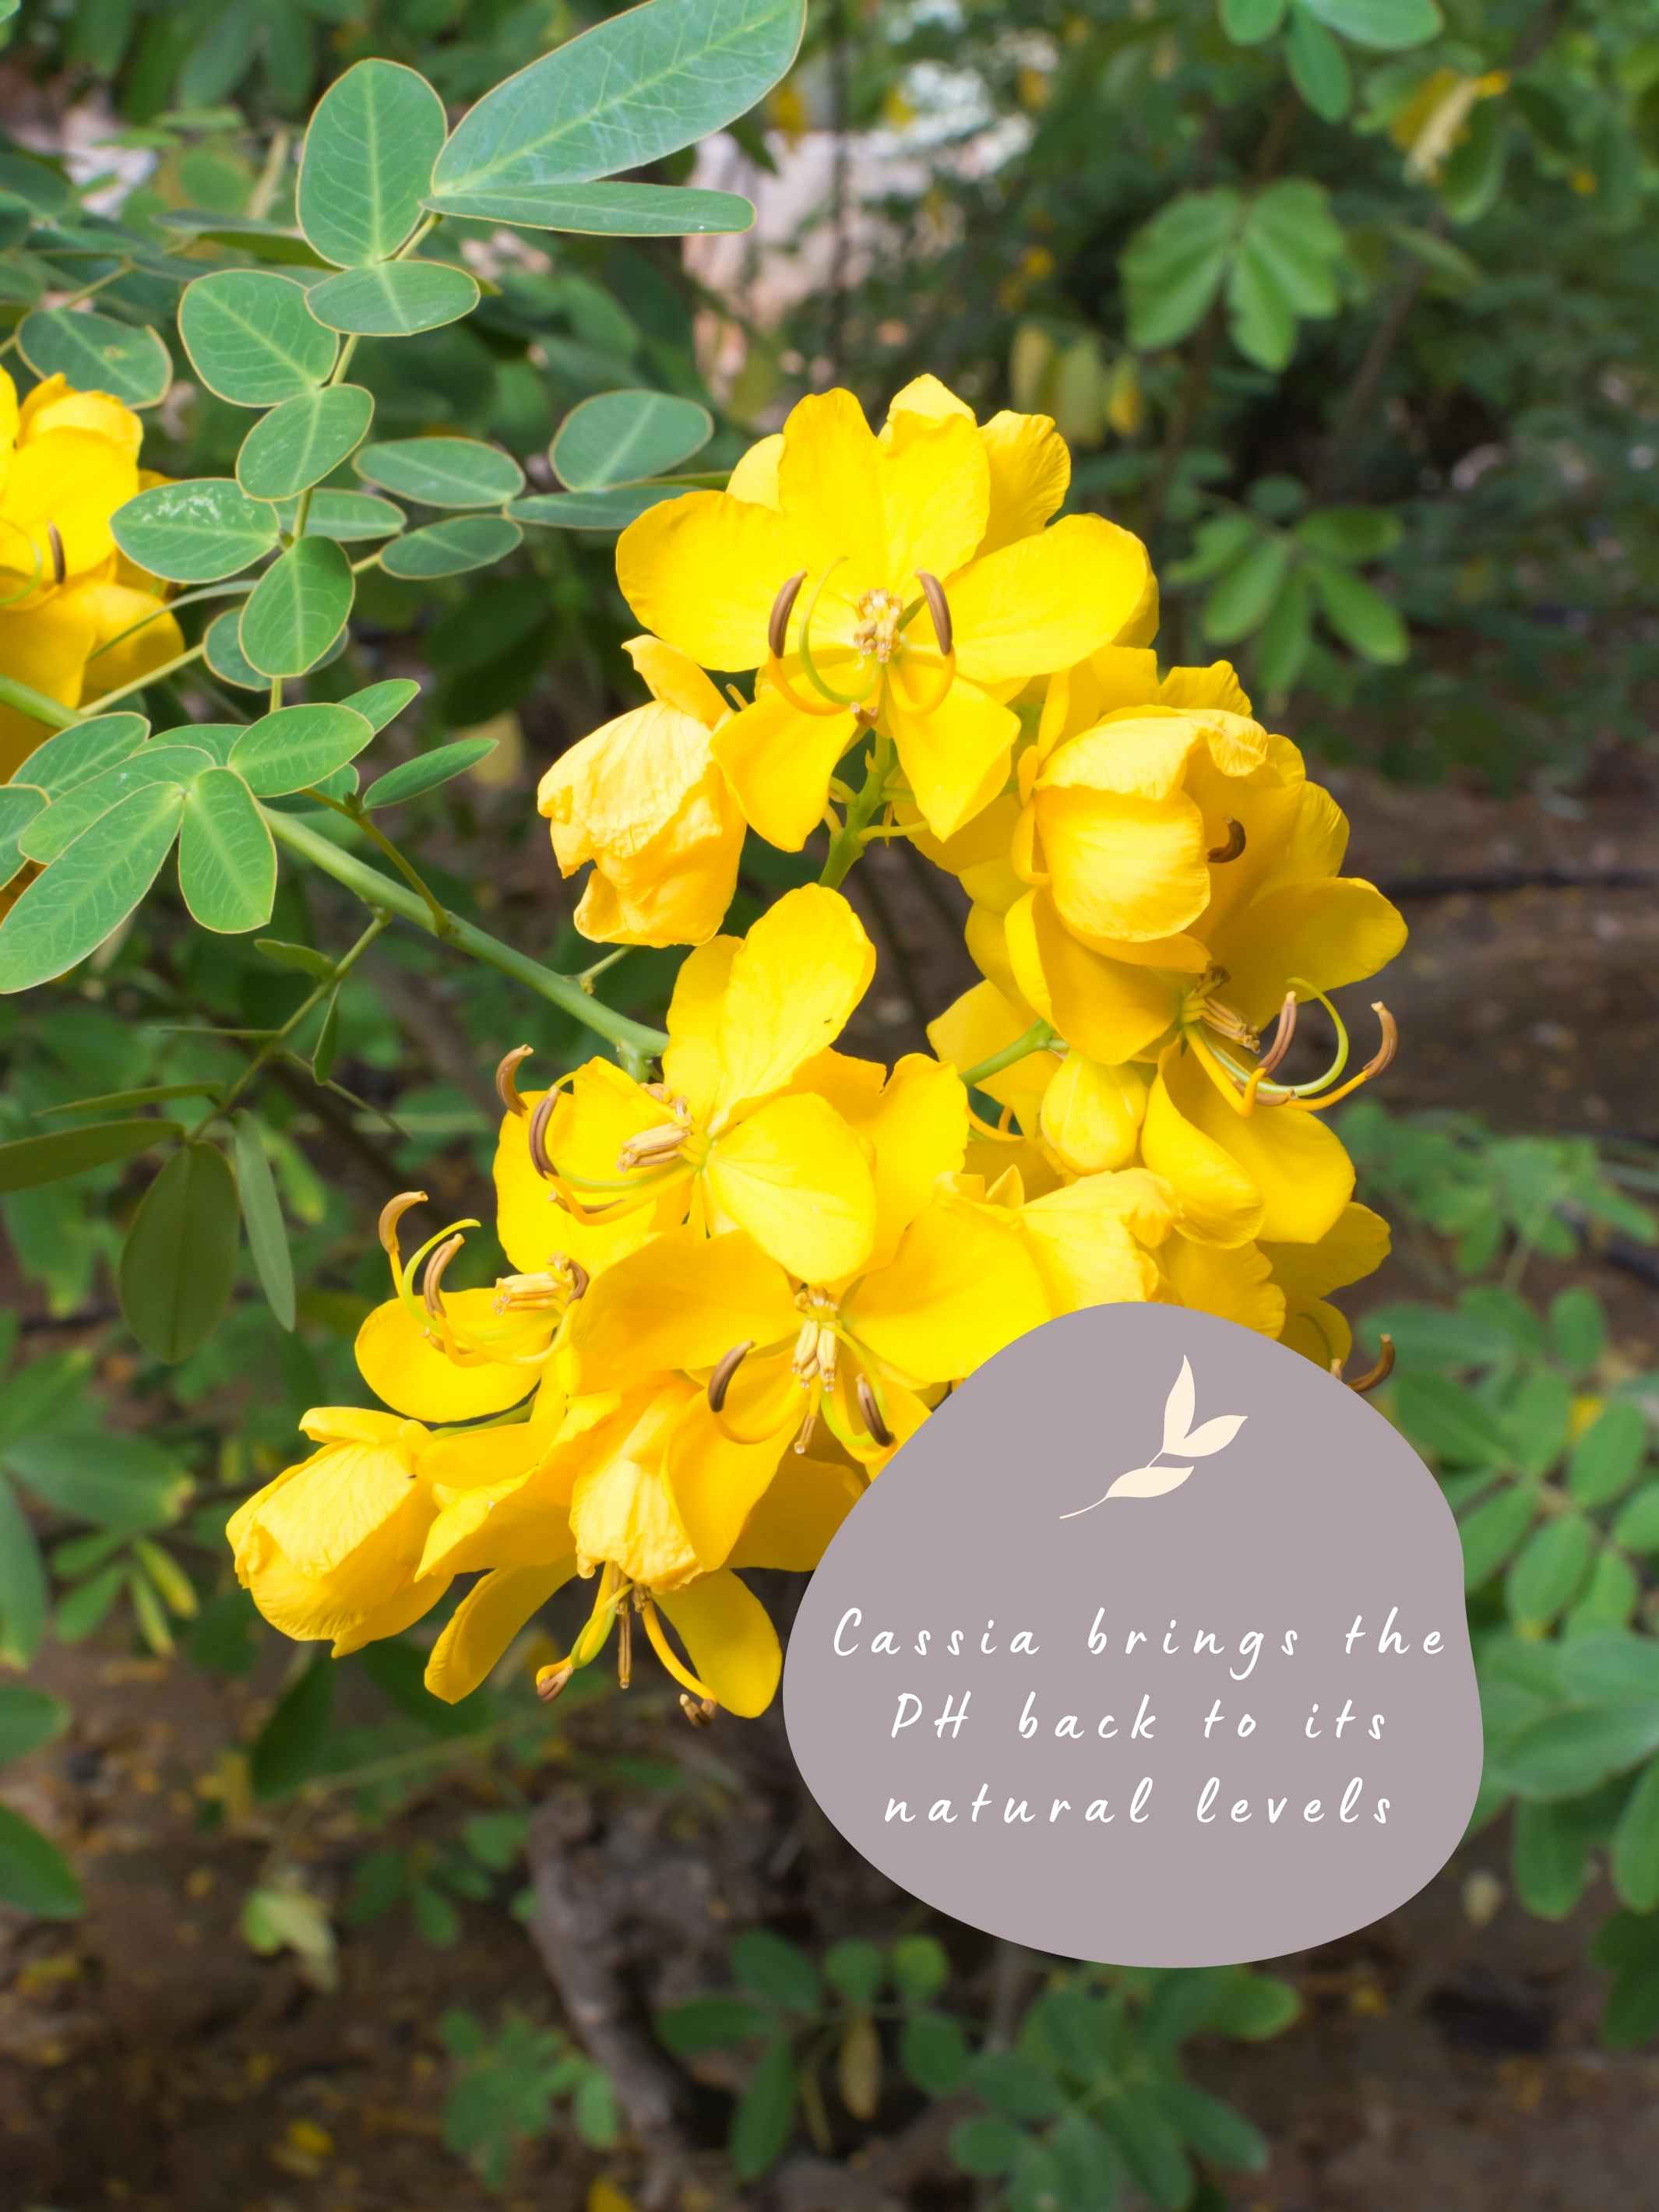 Cassia brings the PH back to its natural levels